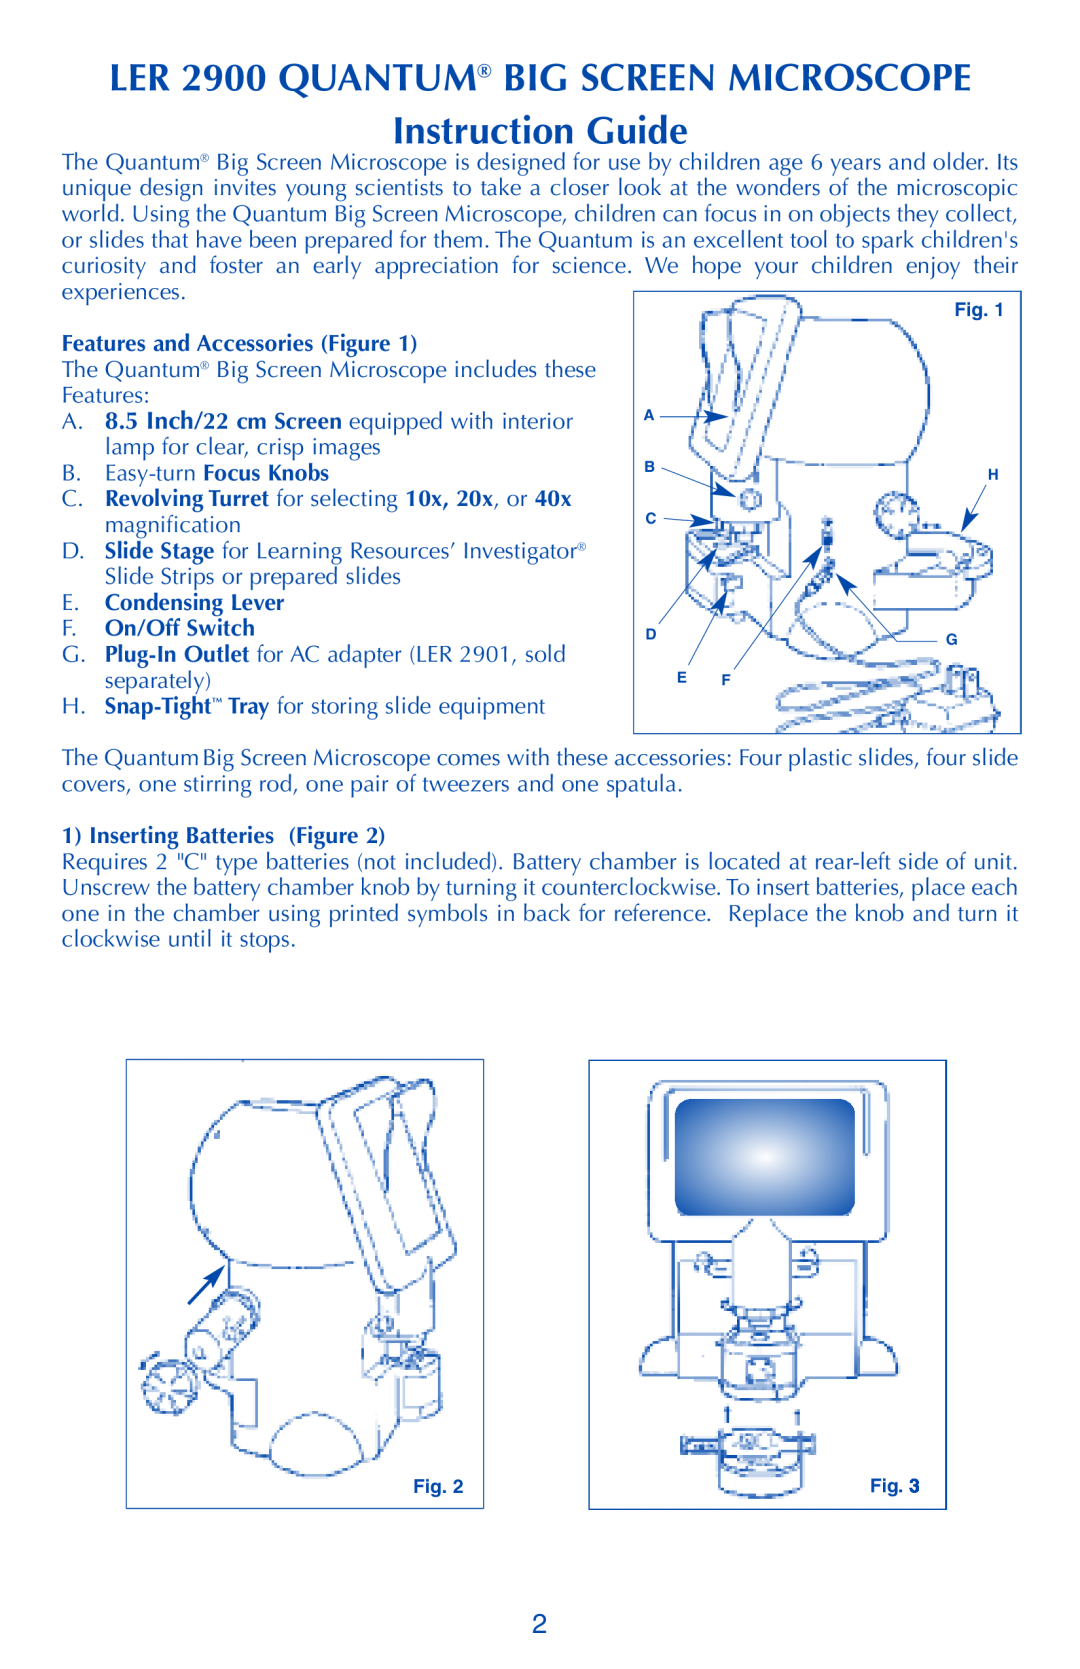 Quantum manual LER 2900 QUANTUM BIG SCREEN MICROSCOPE Instruction Guide, Features and Accessories Figure, On/Off Switch 